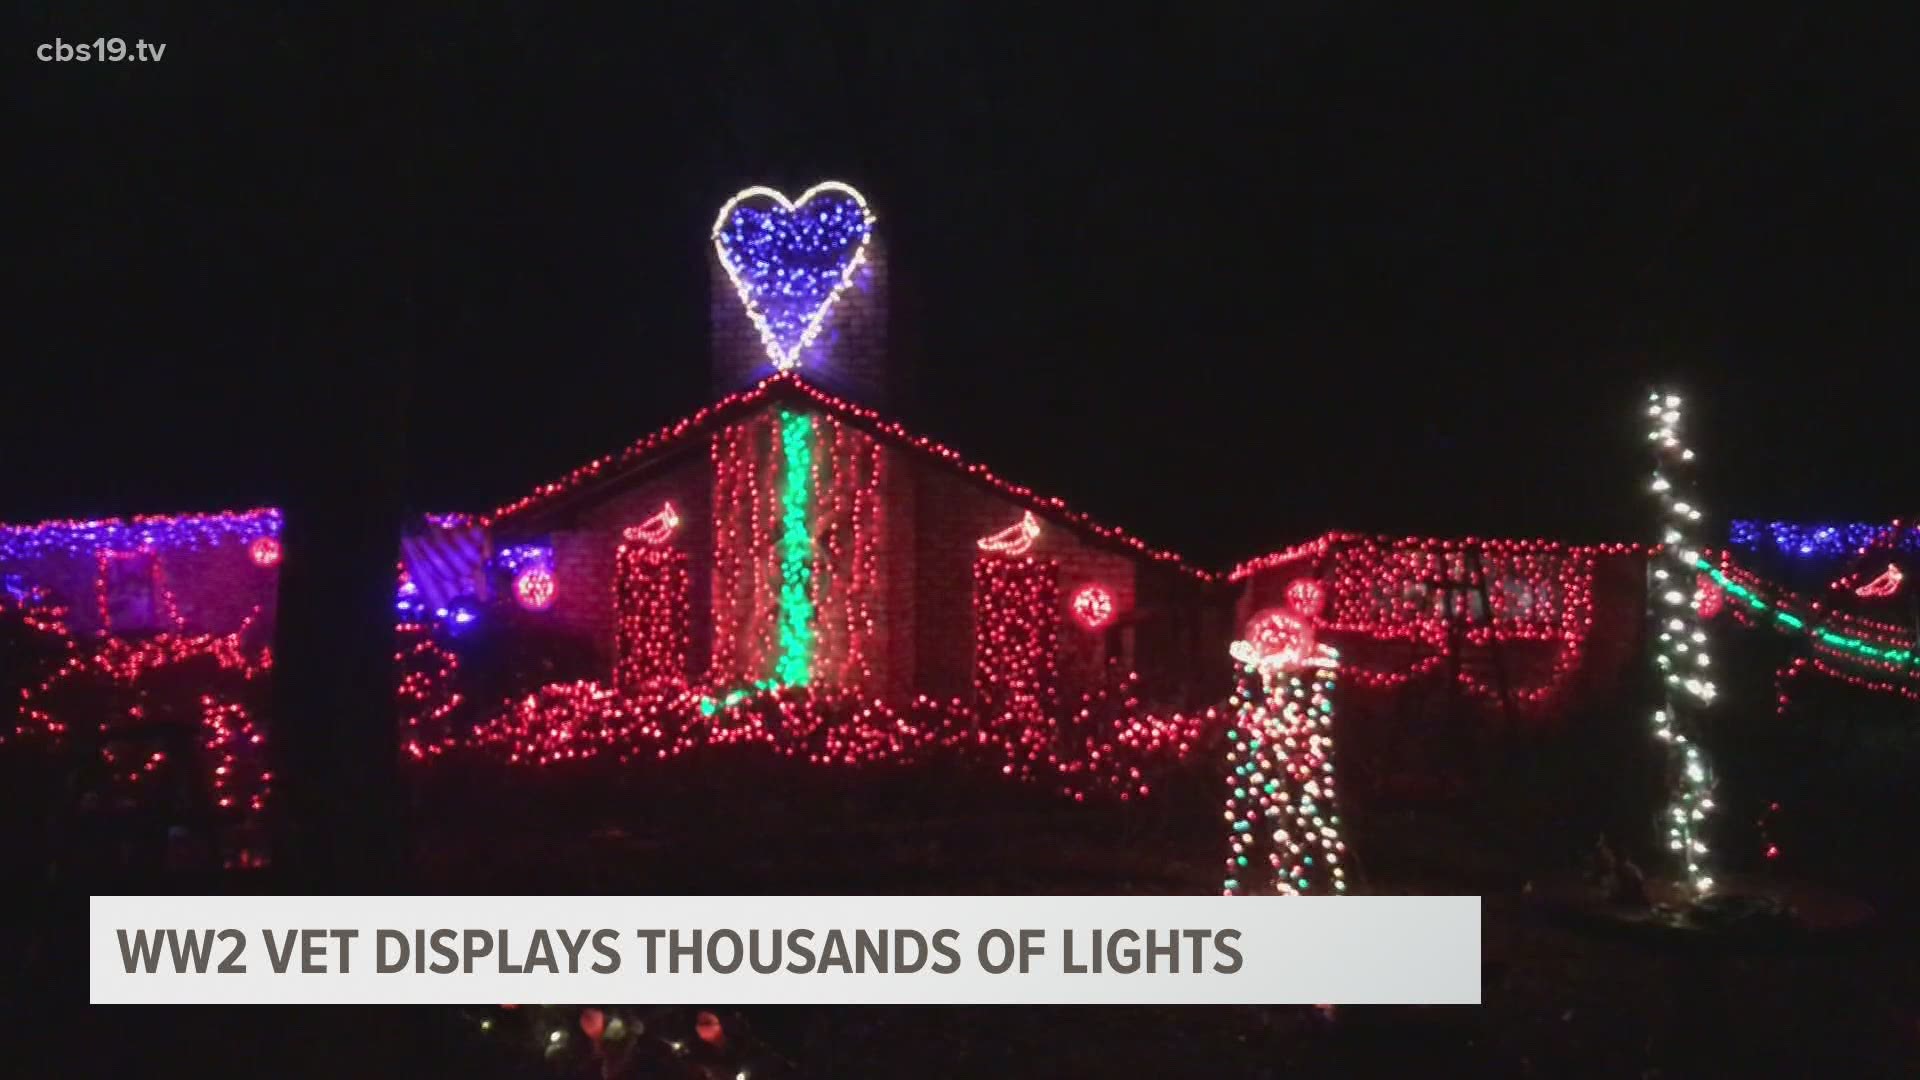 For 48 Christmases, Ray Terry, of Whitehouse, has been flipping this switch to display his Christmas lights for all of East Texas to see!